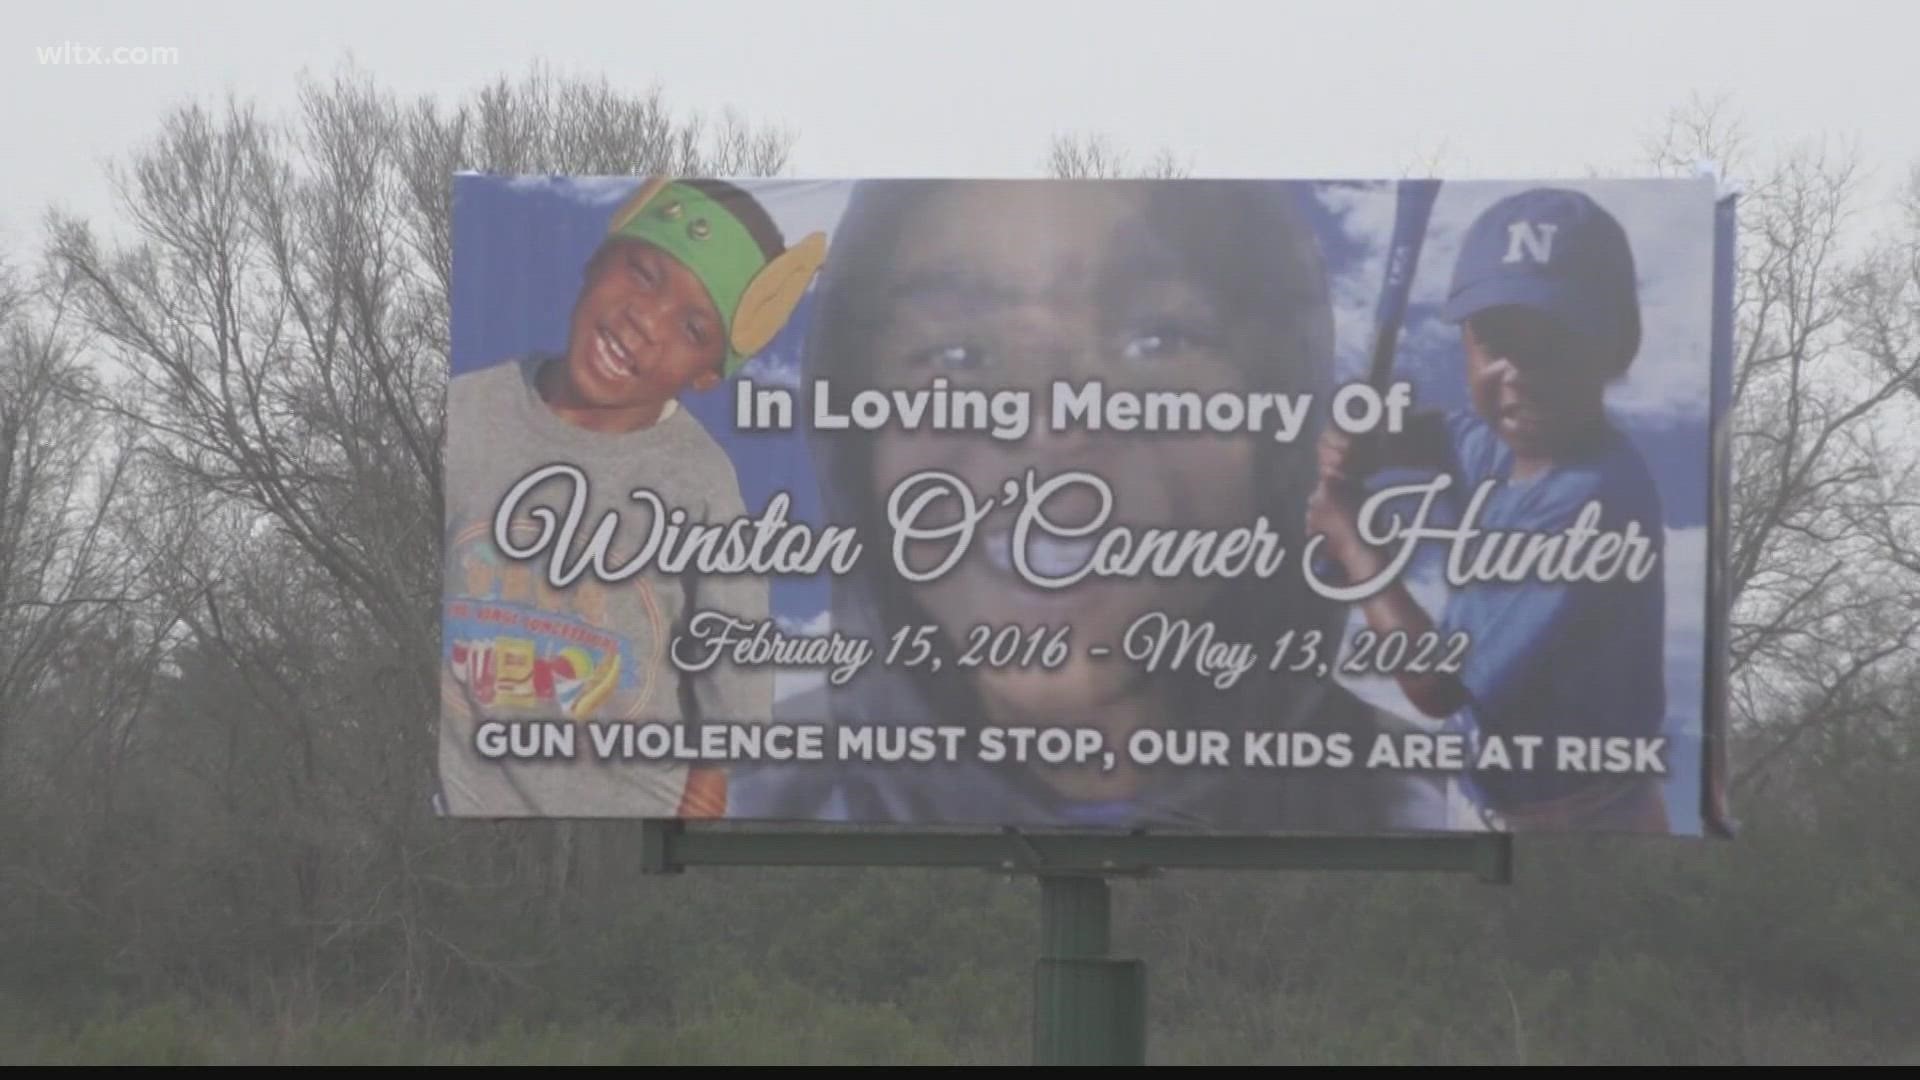 The family of six-year-old Winston Hunter, who was shot to death, is working to honor his life and to make sure he is not forgotten in his community.